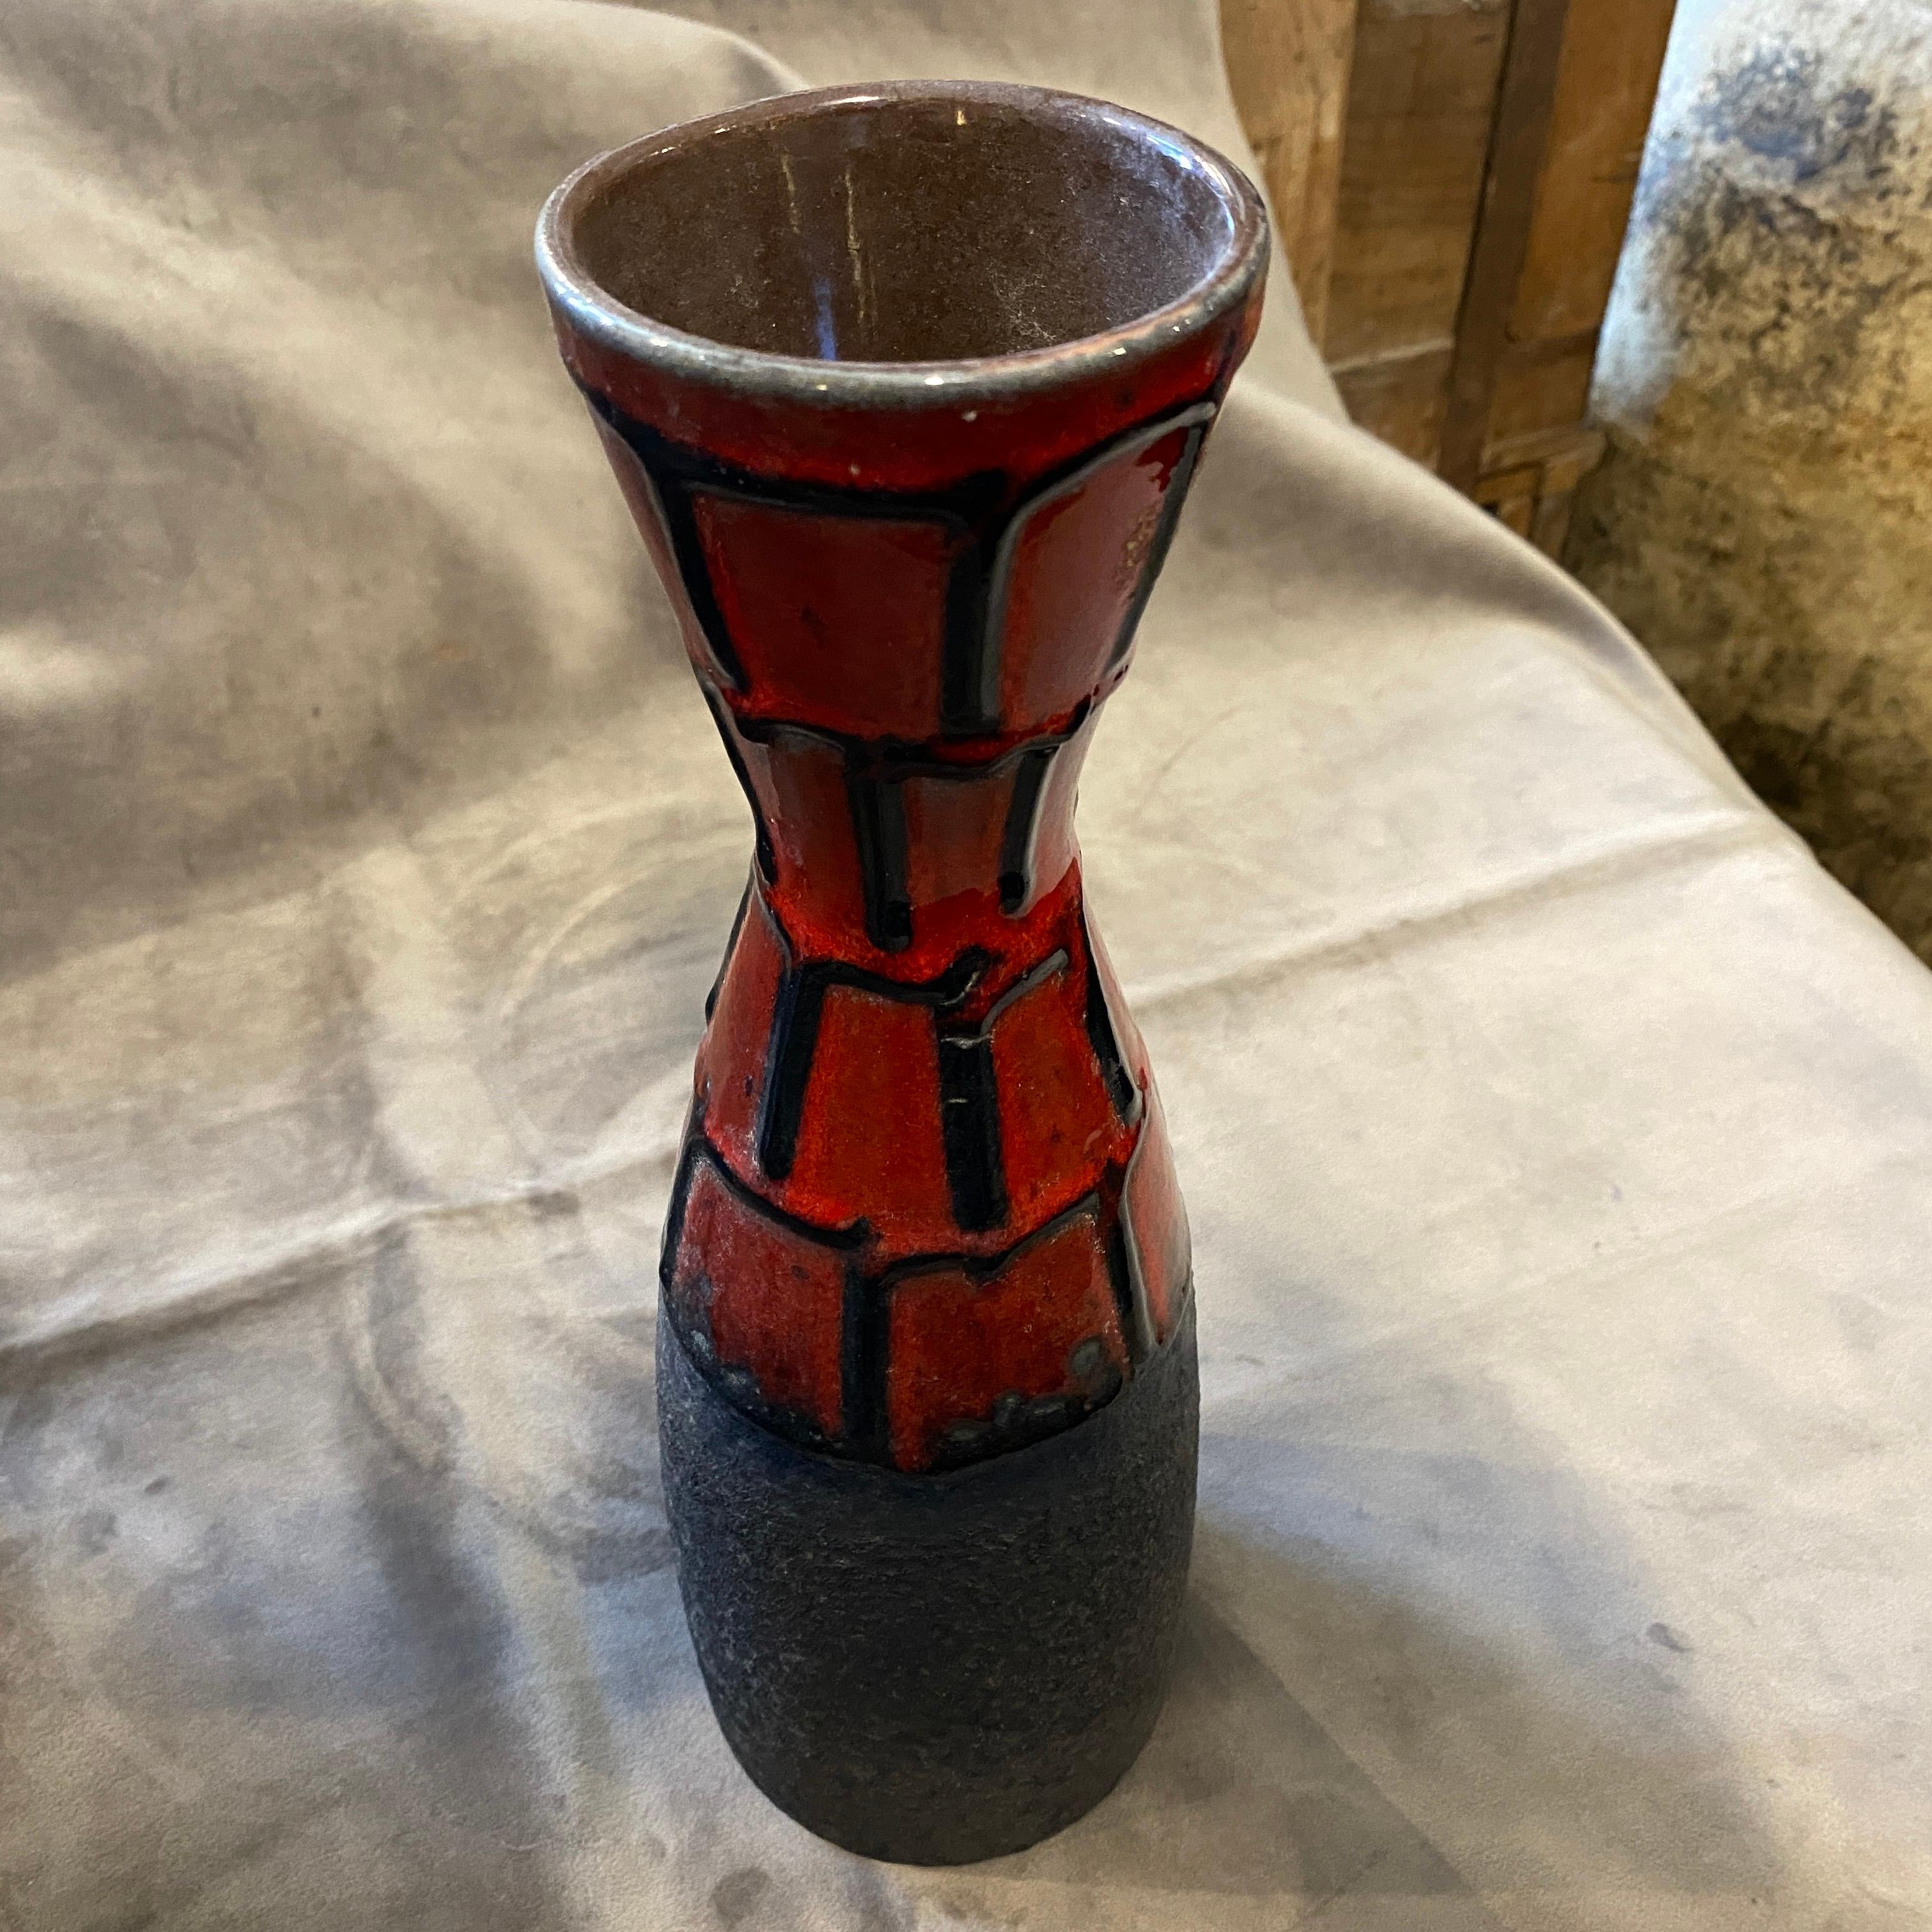 A red and black ceramic vase made in Germany in the Seventies by Roth Keramik. This kind of ceramic has been called Fat Lave KeramiK and it was very popular in Italy and Germany in the Mid-20th century. It's marked West Germany and numbers on the